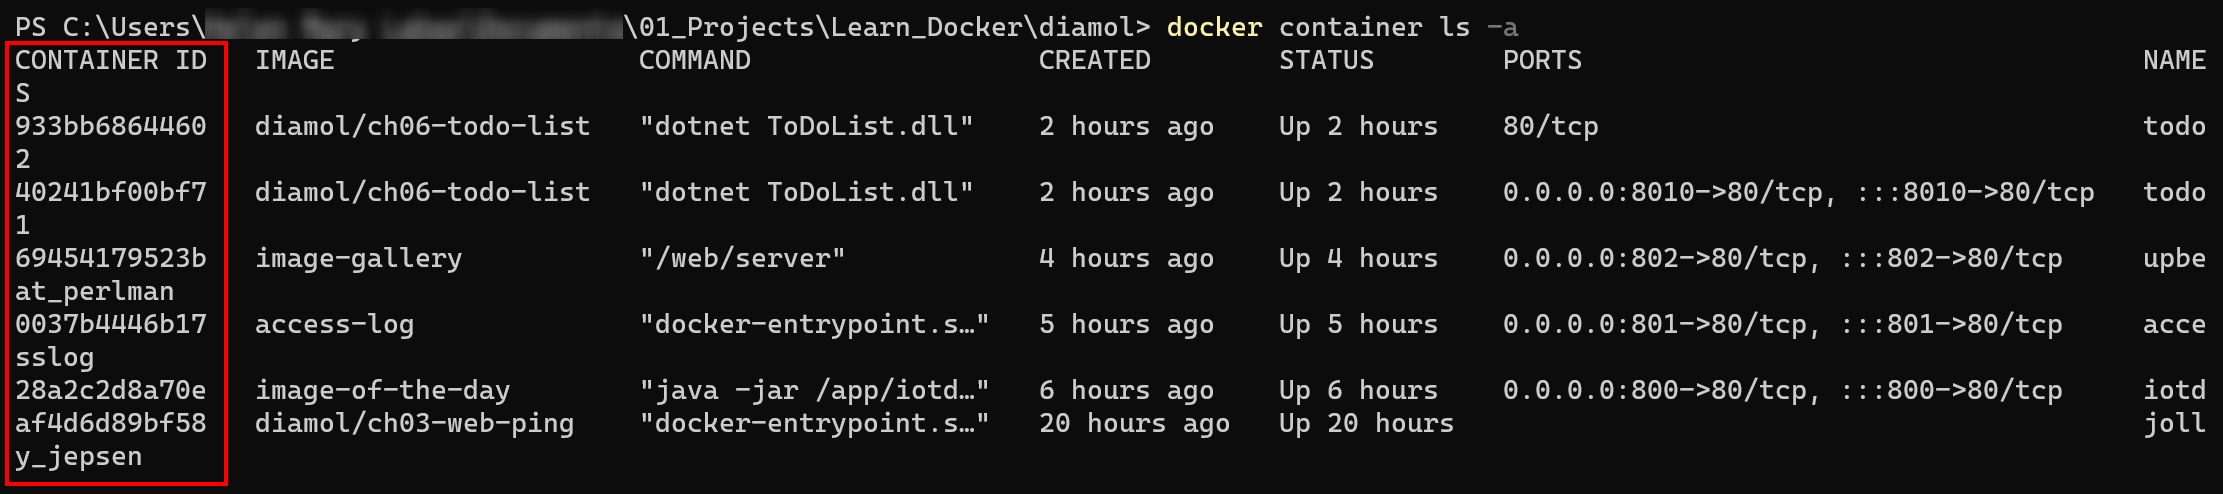 Listing Docker Images to get the Container ID